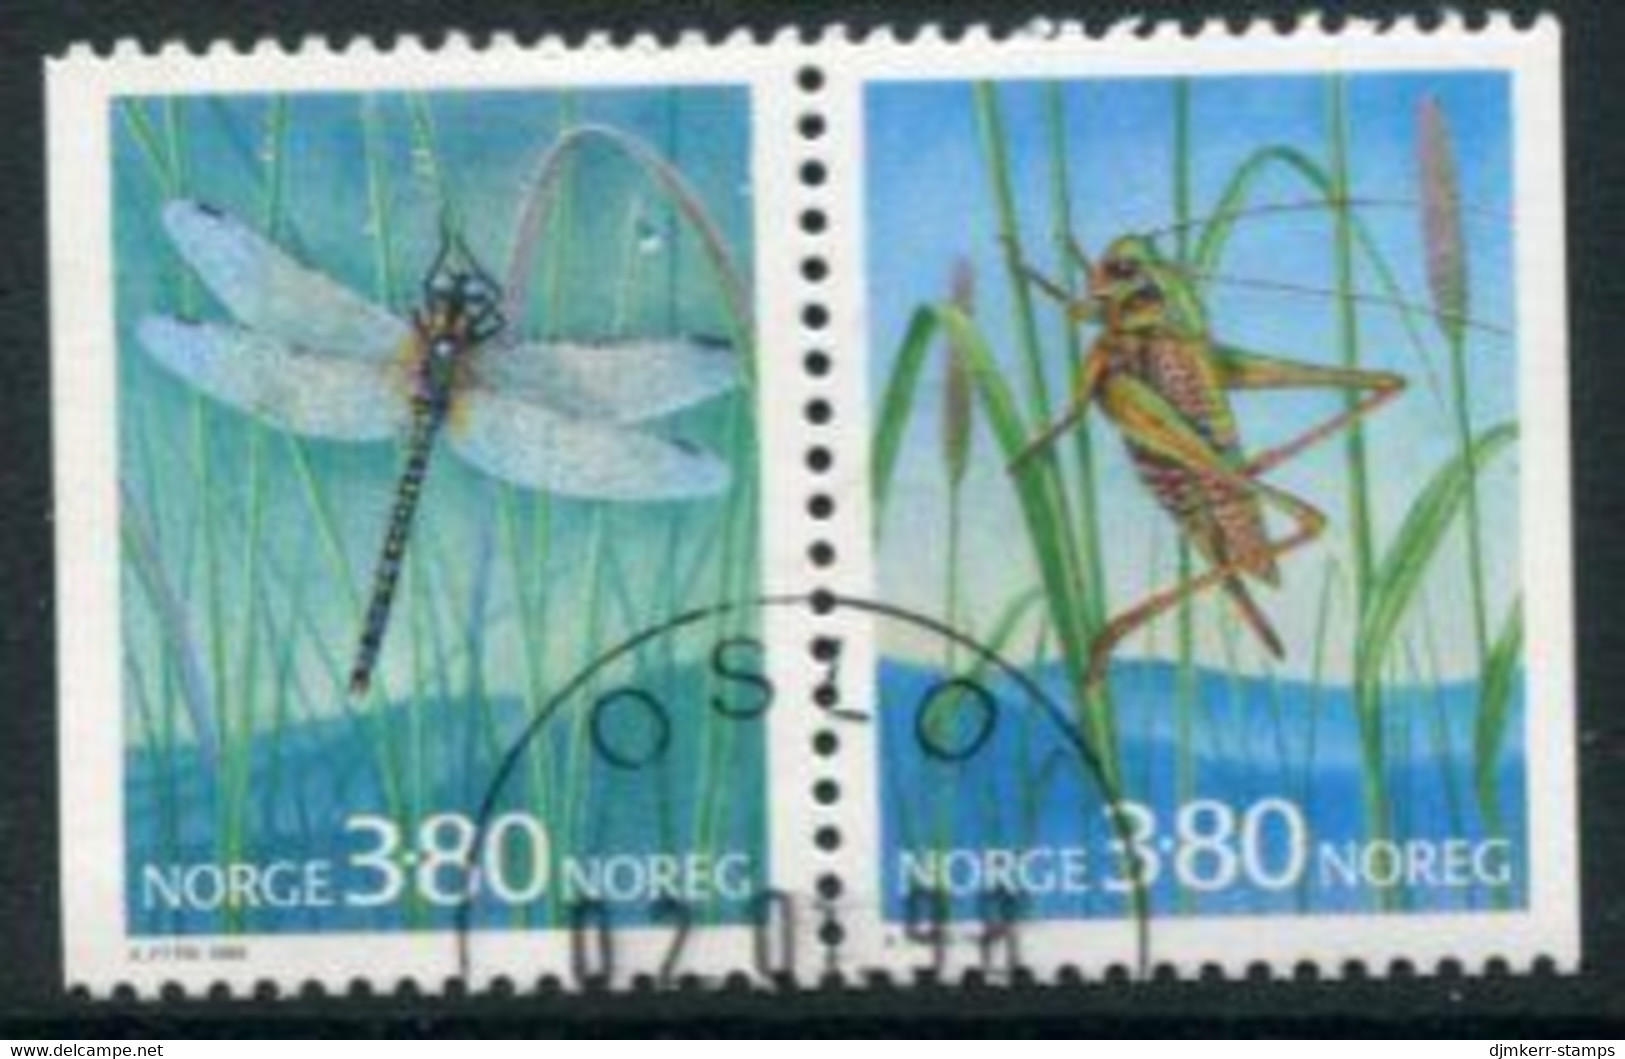 NORWAY 1998 Insects Pair Used.   Michel 1275-76 - Used Stamps